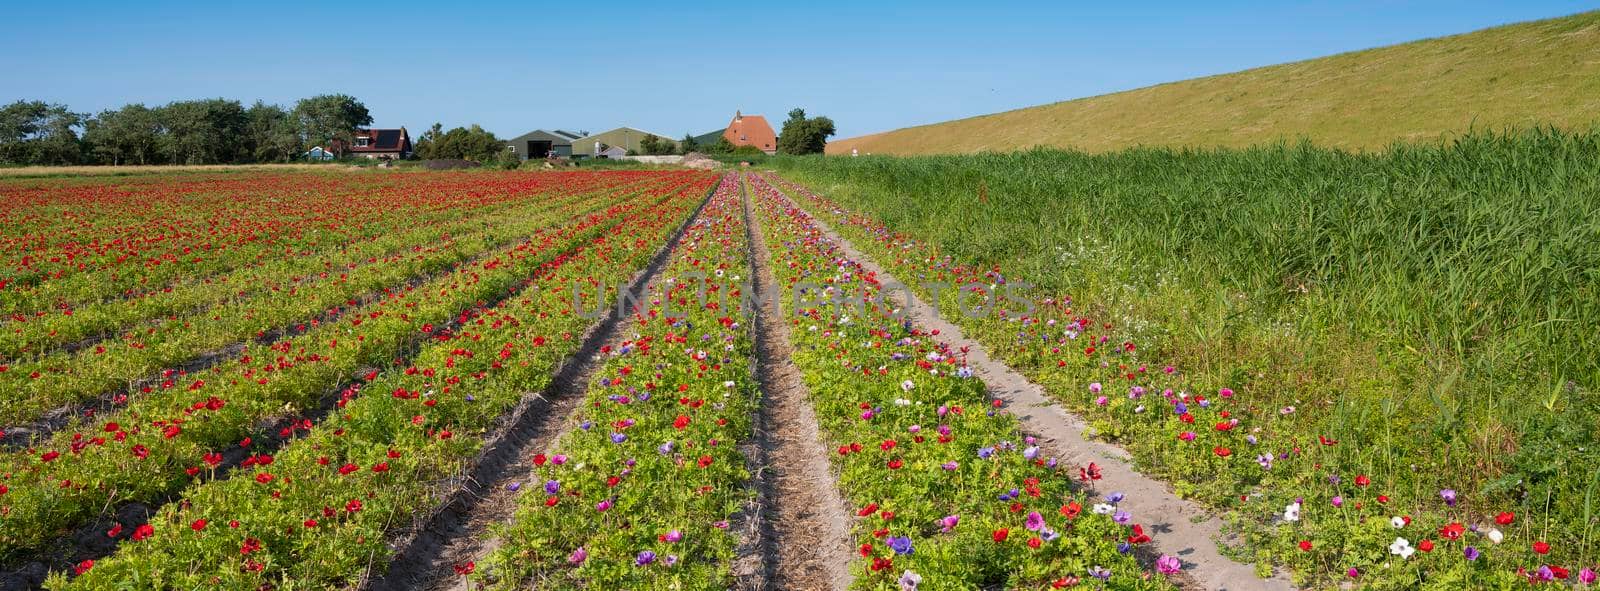 field of red, purple and pink ranunculus flowers on island of texel in the netherlands under blue sky in summer near grassy dike